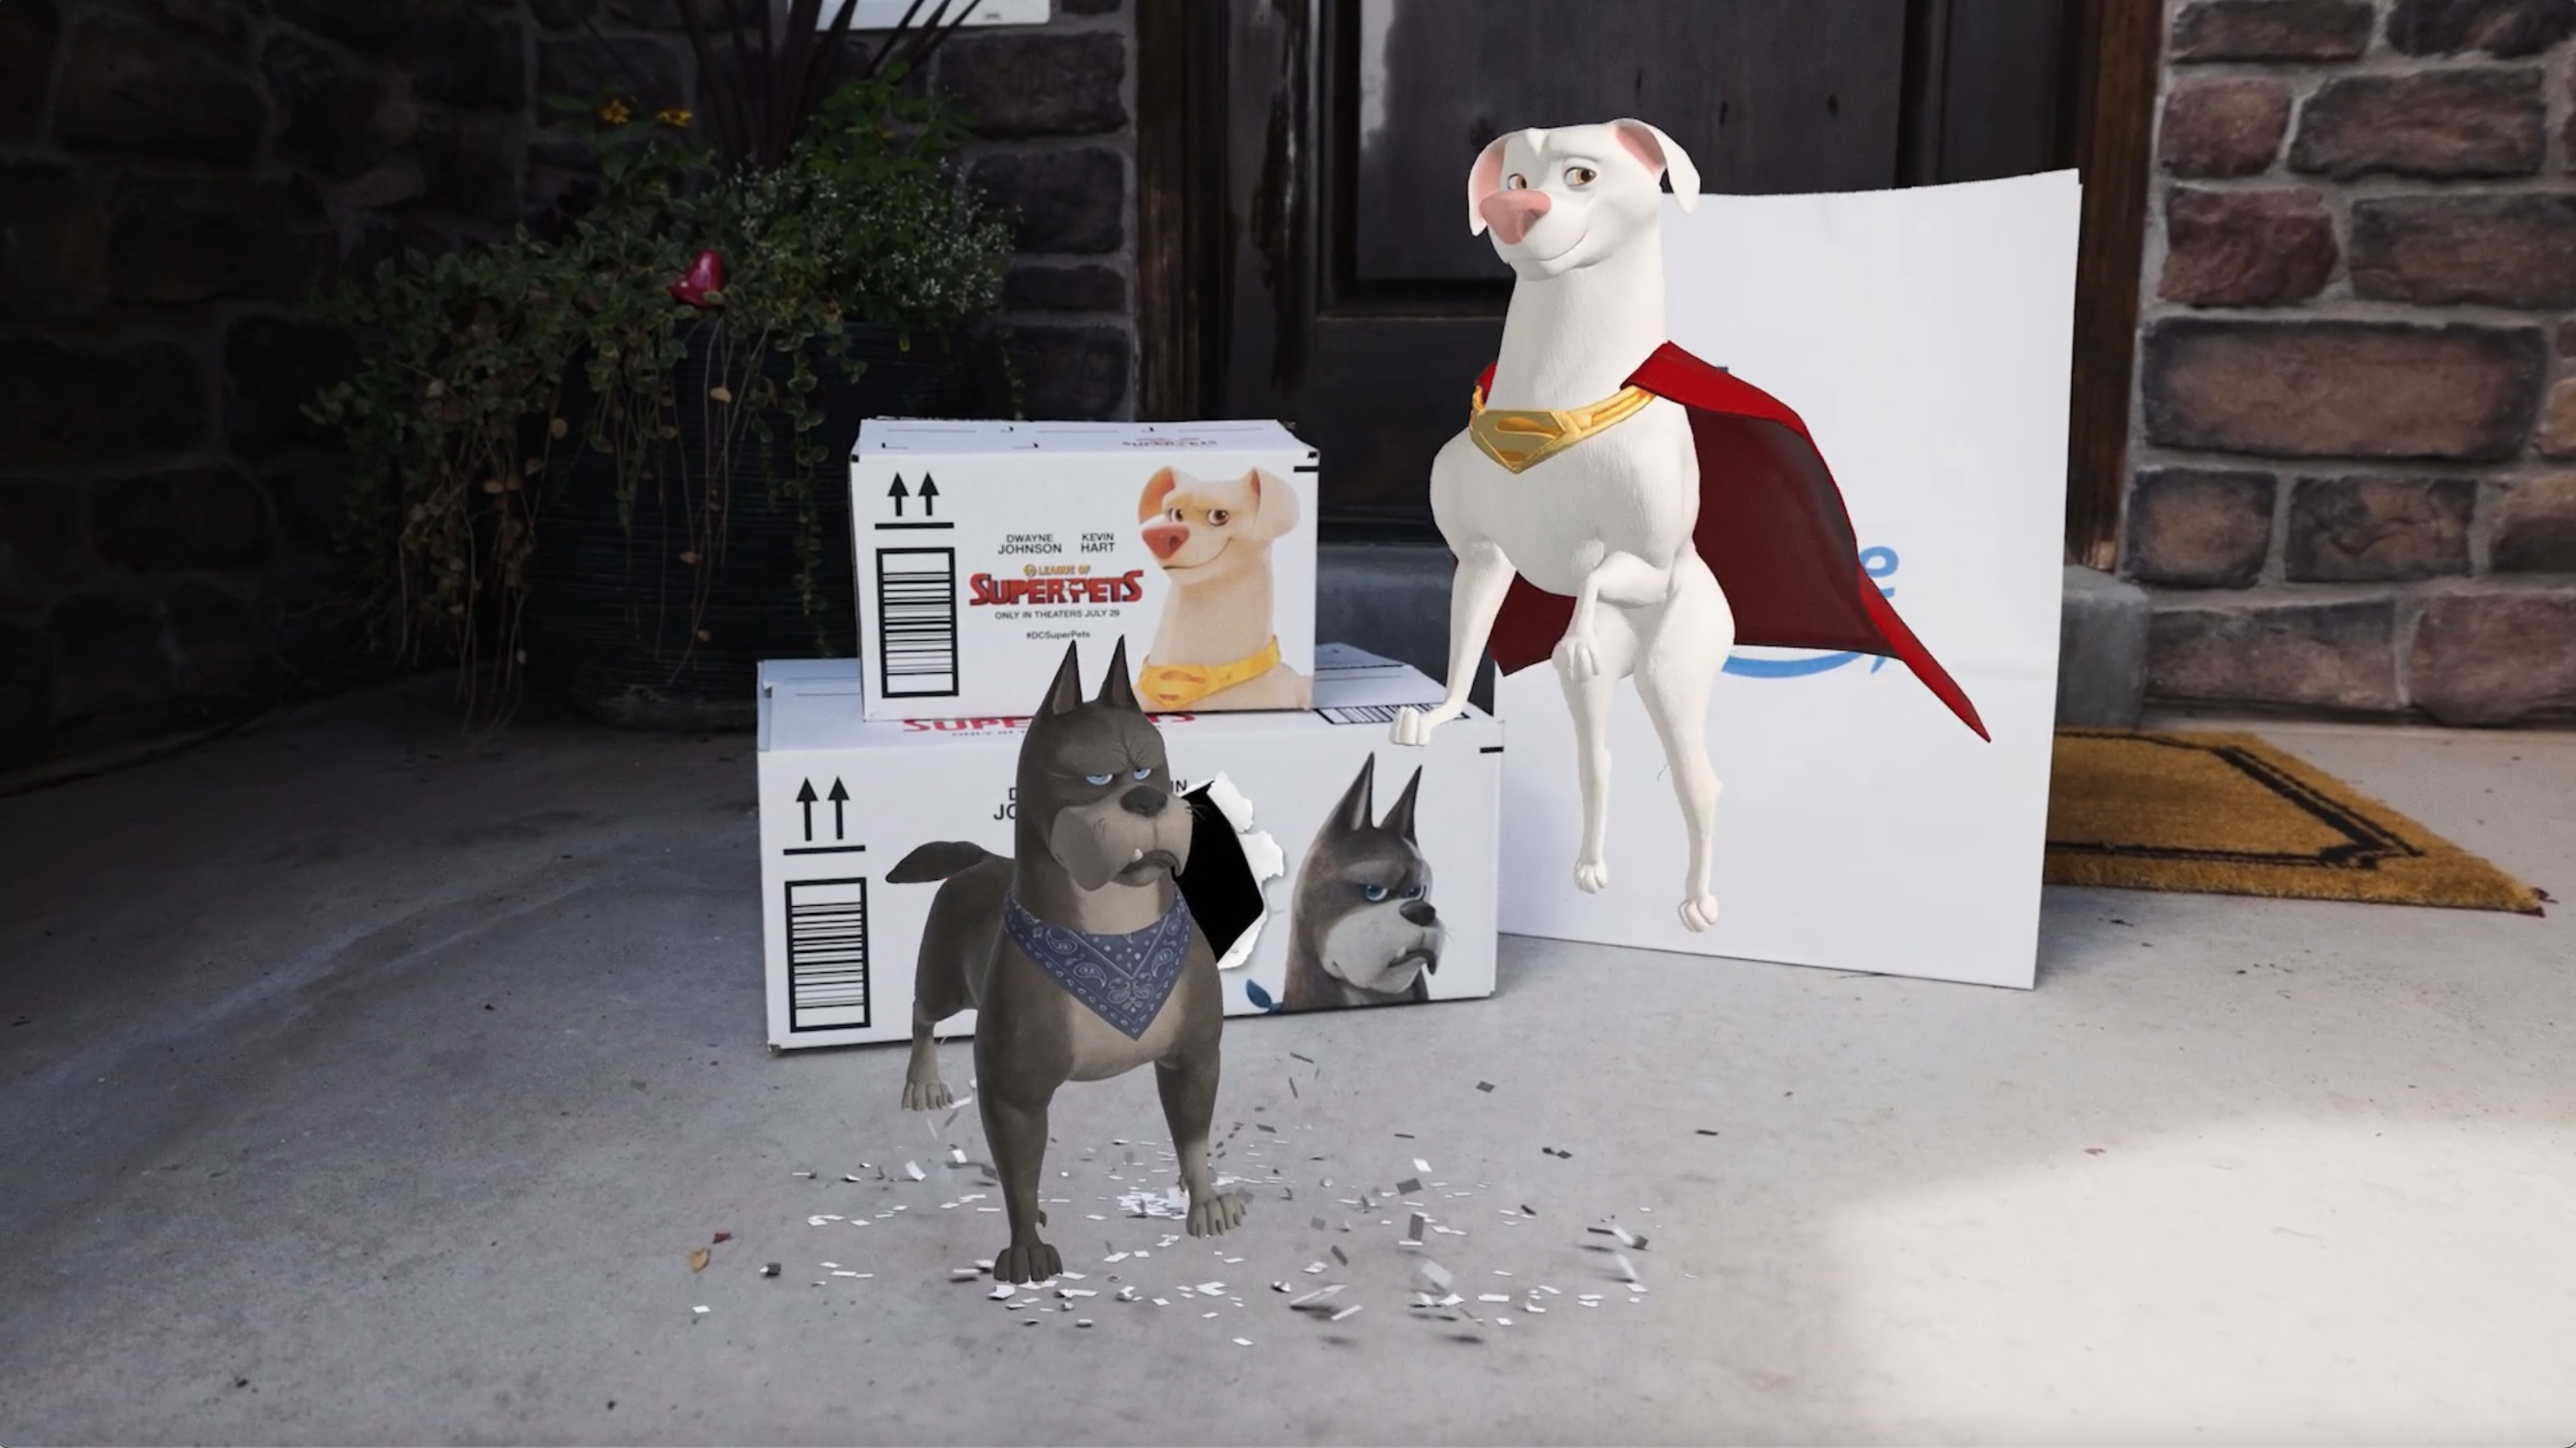 Warner Bros Pictures brings the DC League of Super-Pets characters to life through Amazon boxes